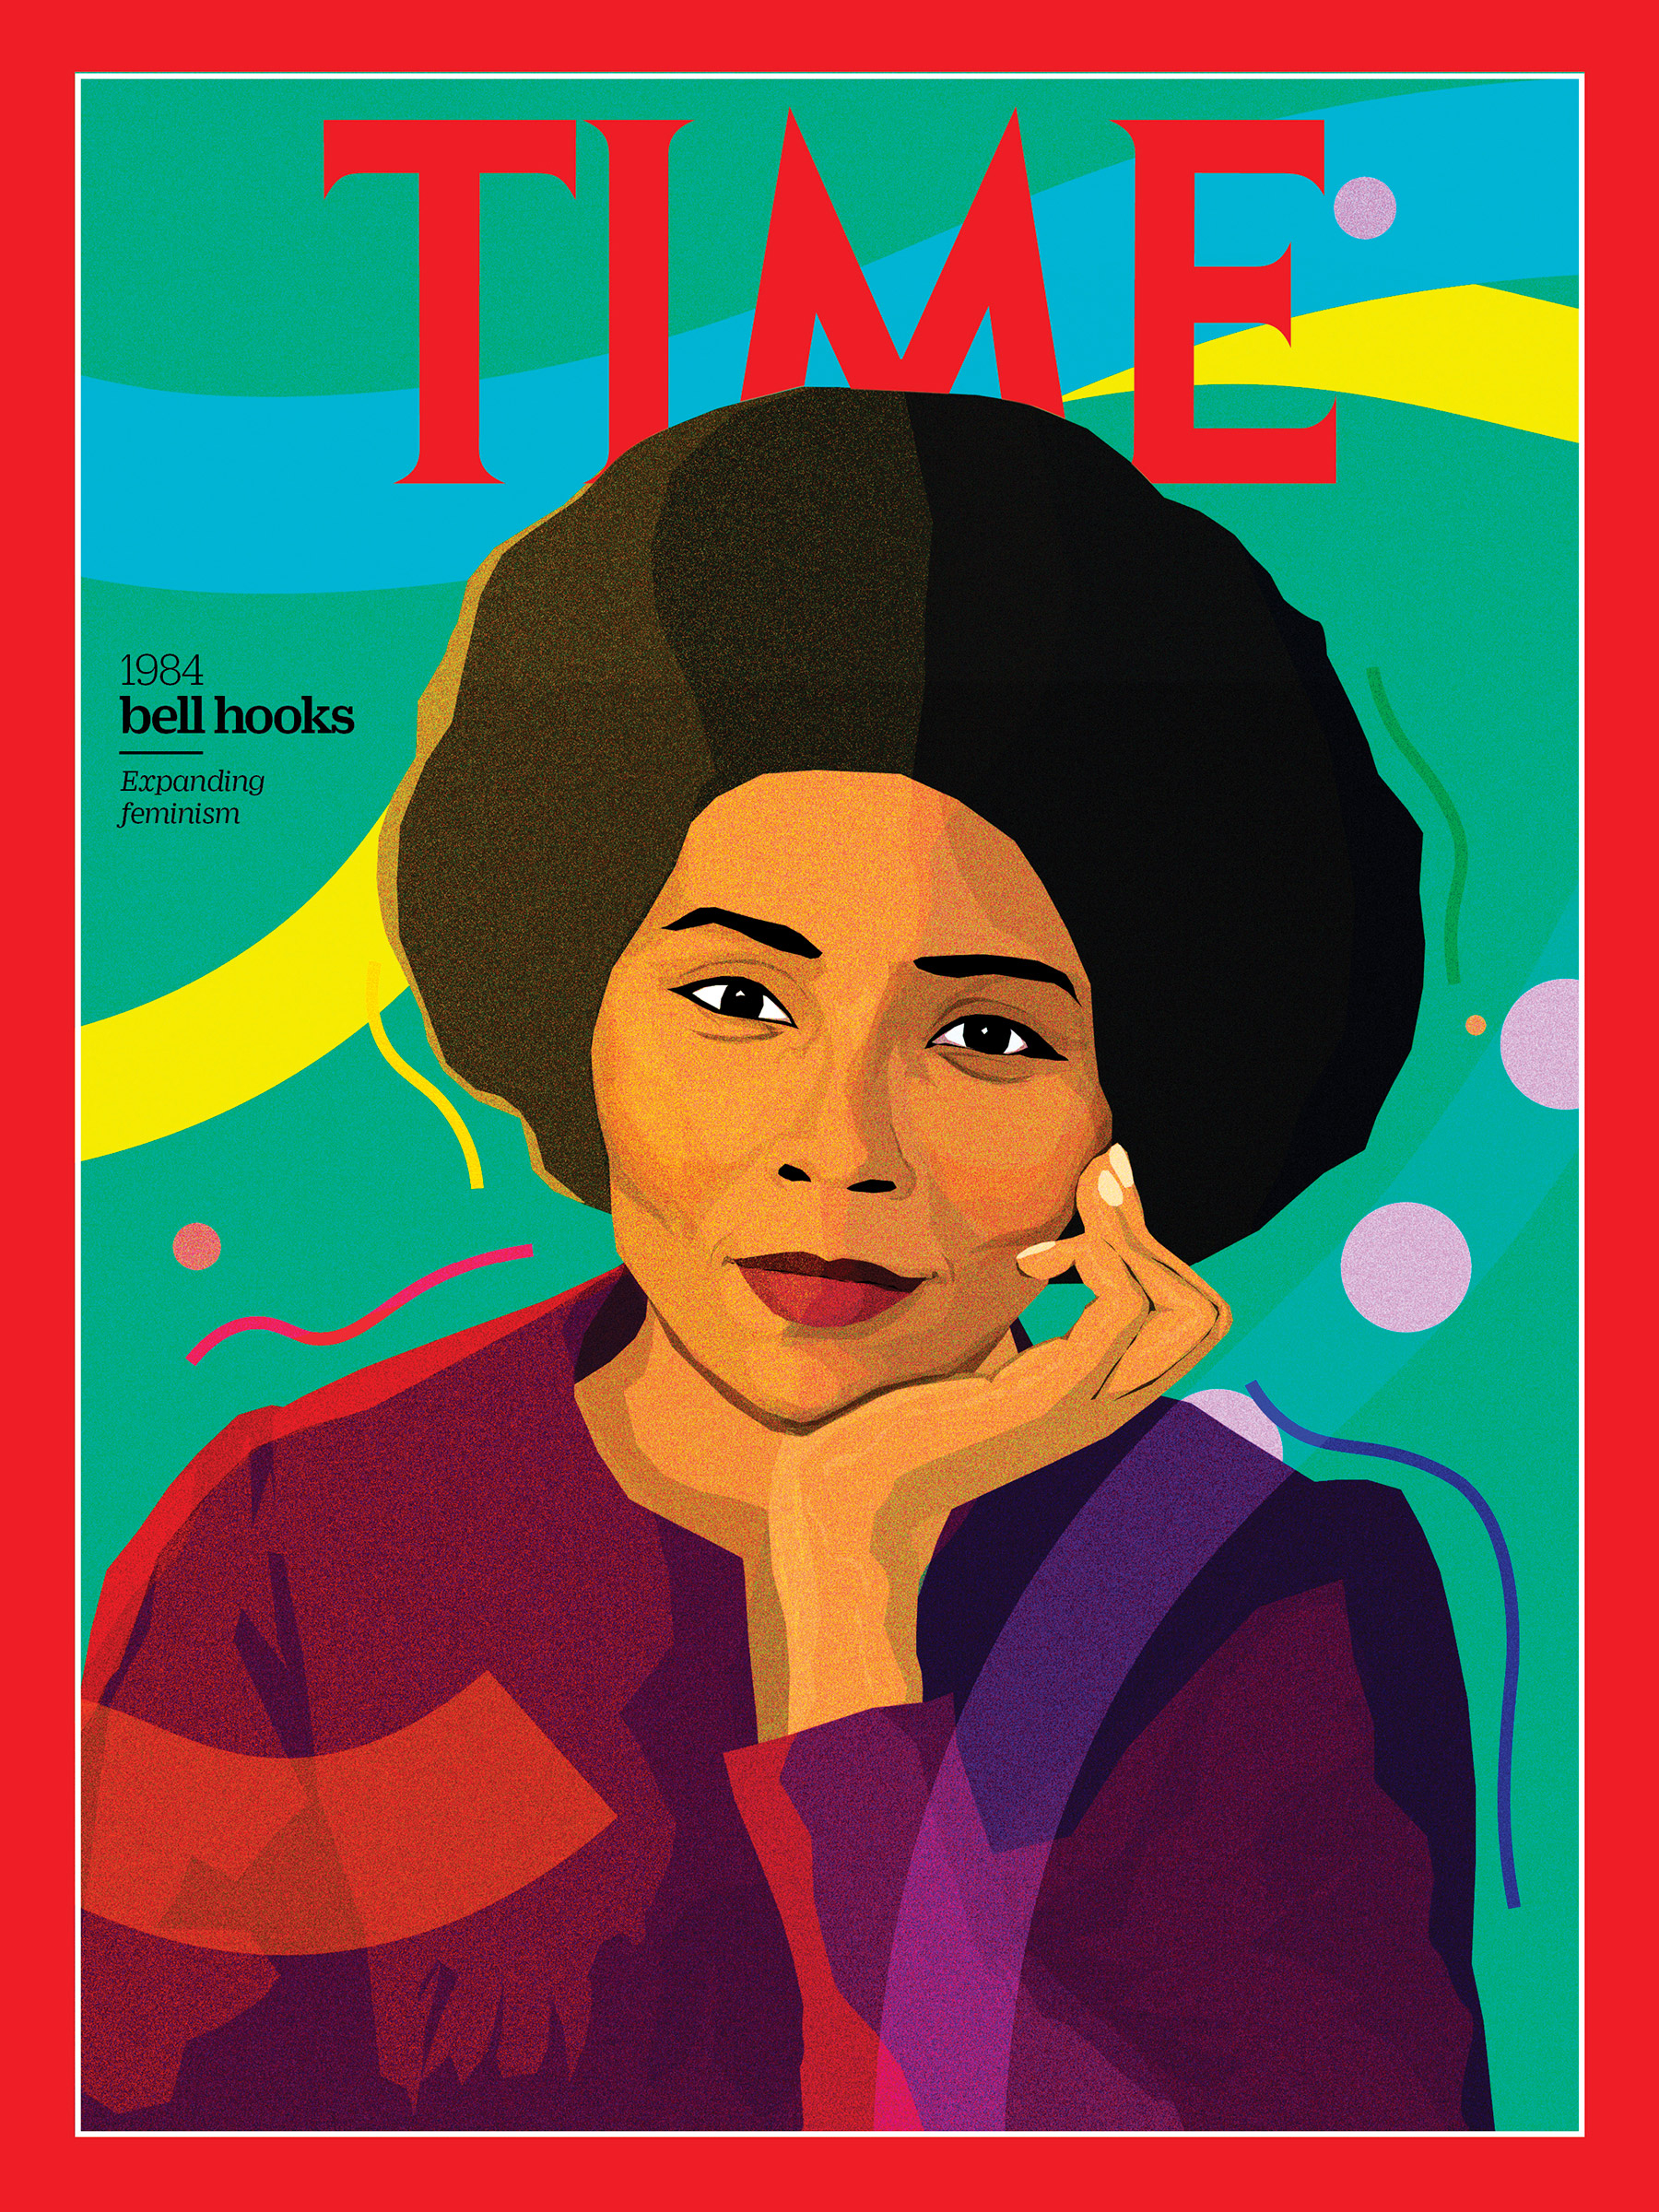 <a href="https://fineartamerica.com/featured/bell-hooks-1984-time.html"><strong>Buy the cover art→</strong></a> (Art by Monica Ahanonu for TIME)